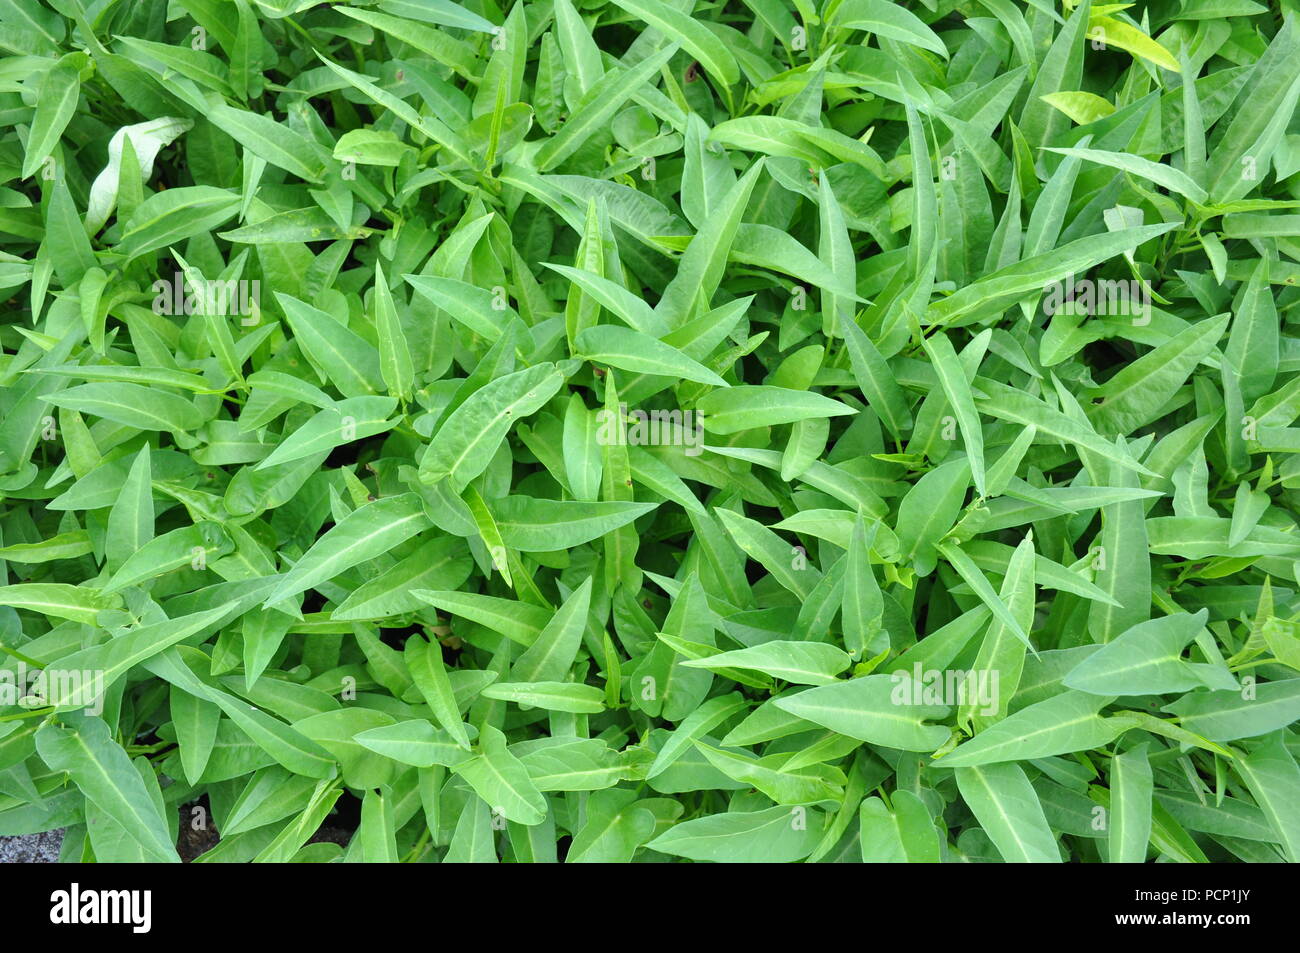 Water spinach Stock Photo